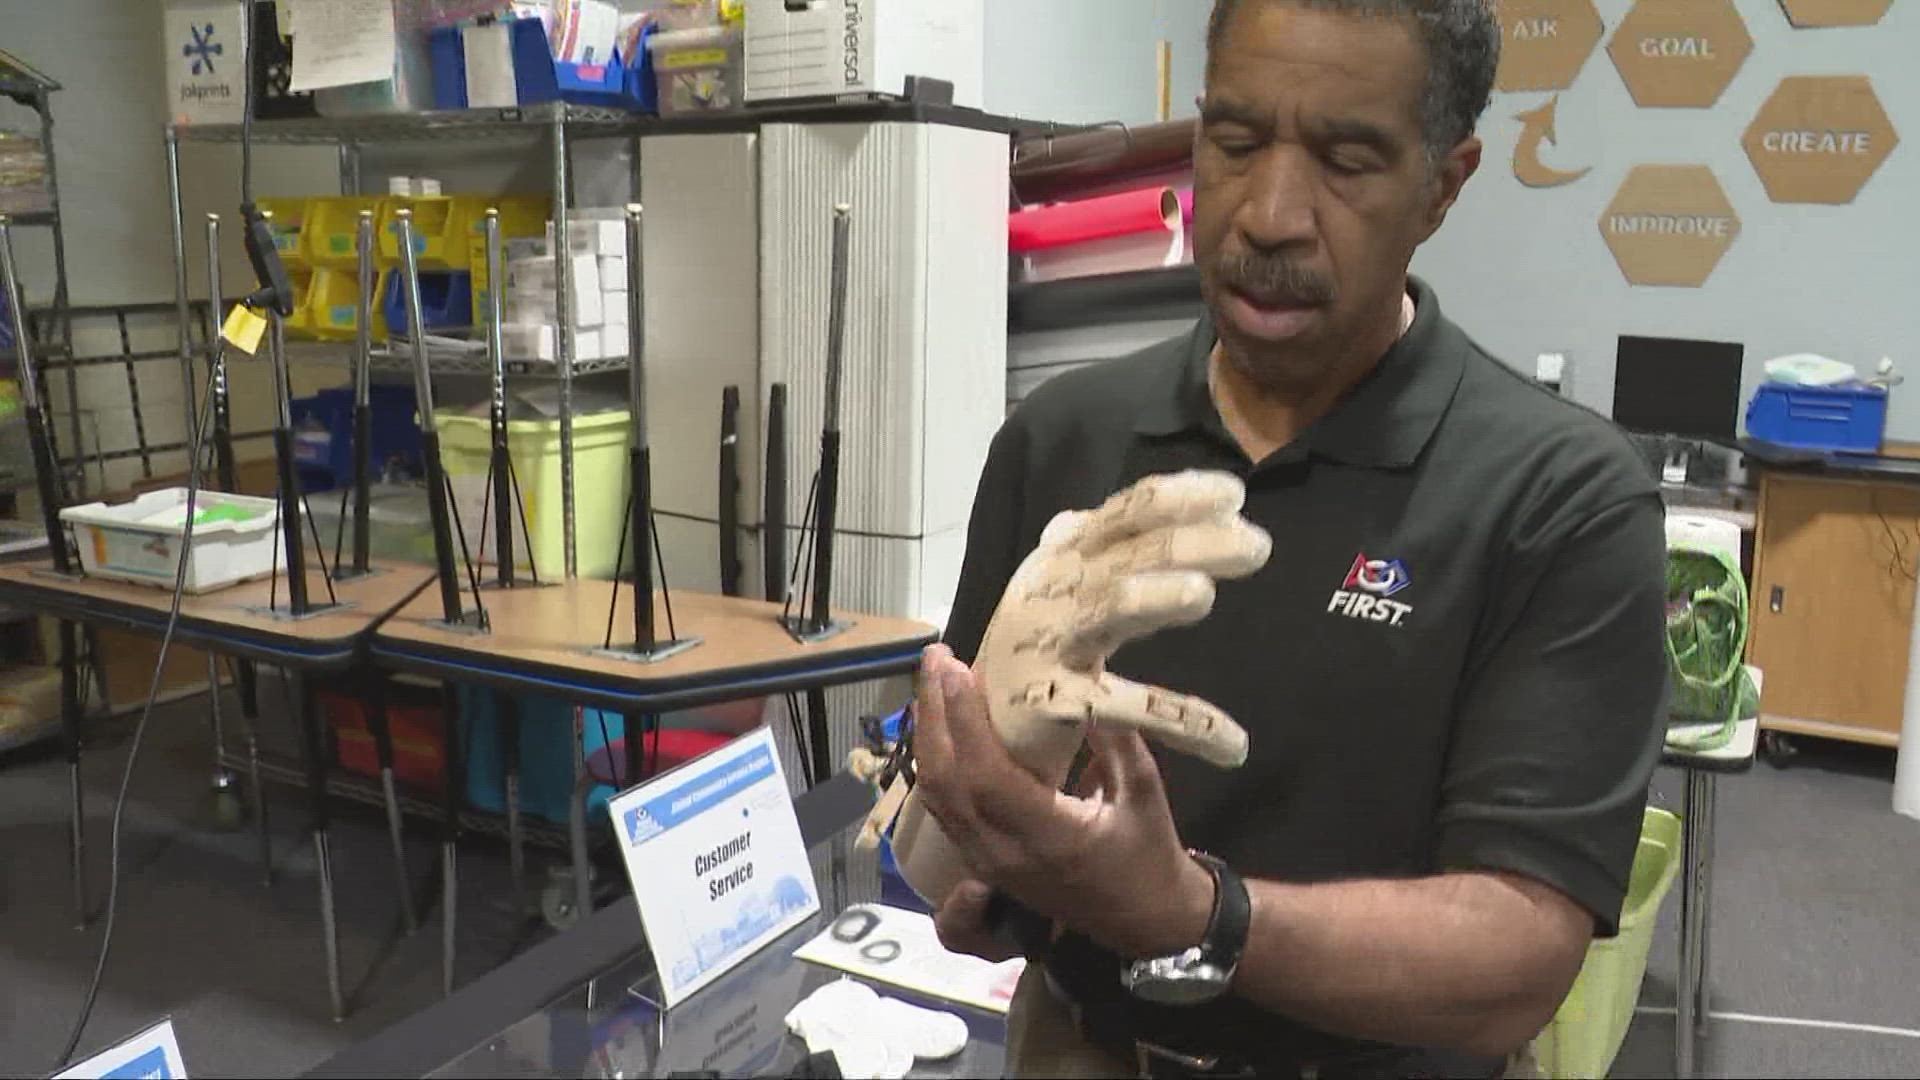 CMSD students are putting their heads together to use the power of technology to change lives.  Here's how a robotics program is building prosthetic limbs for kids.